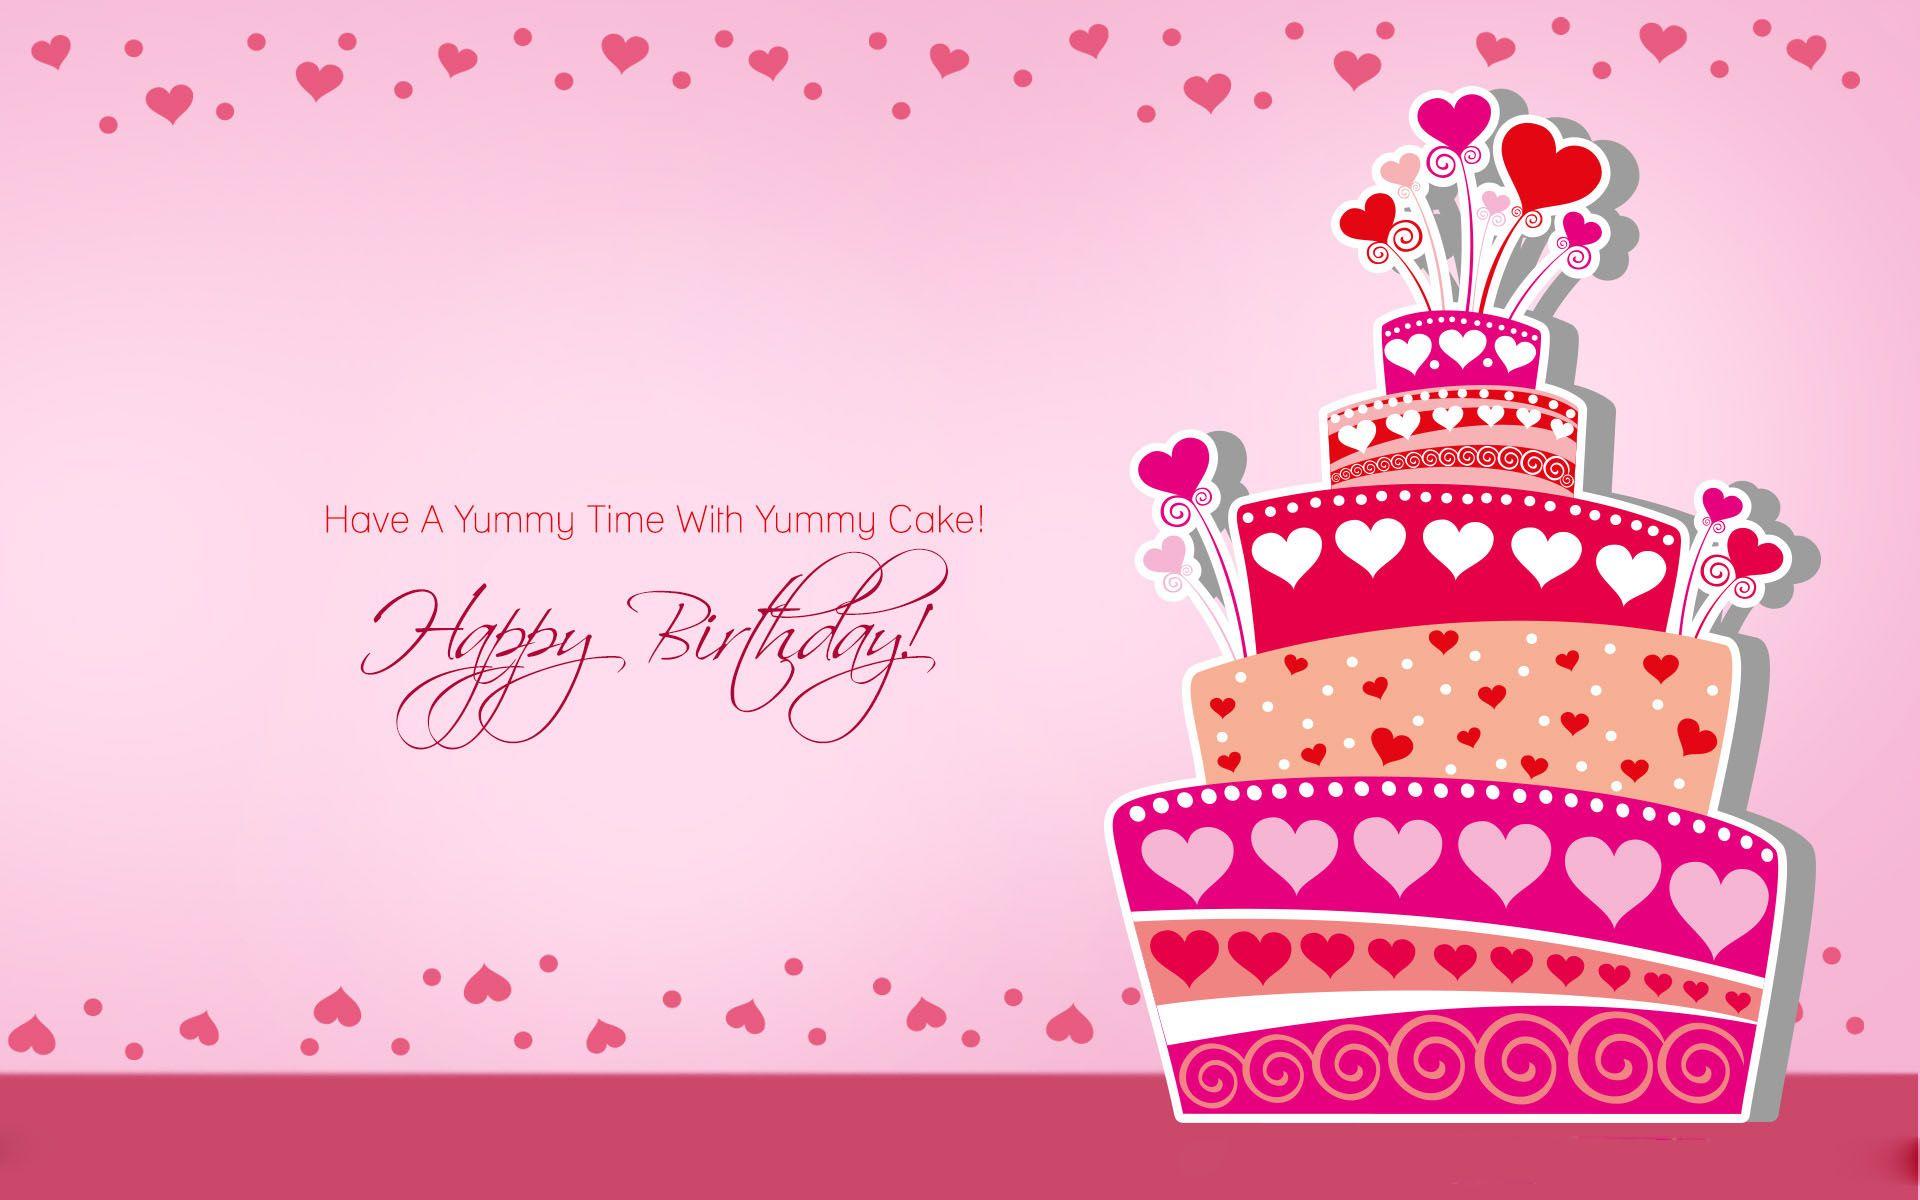 Happy Birthday Wallpapers Wallpaper, HD, Free for Facebook